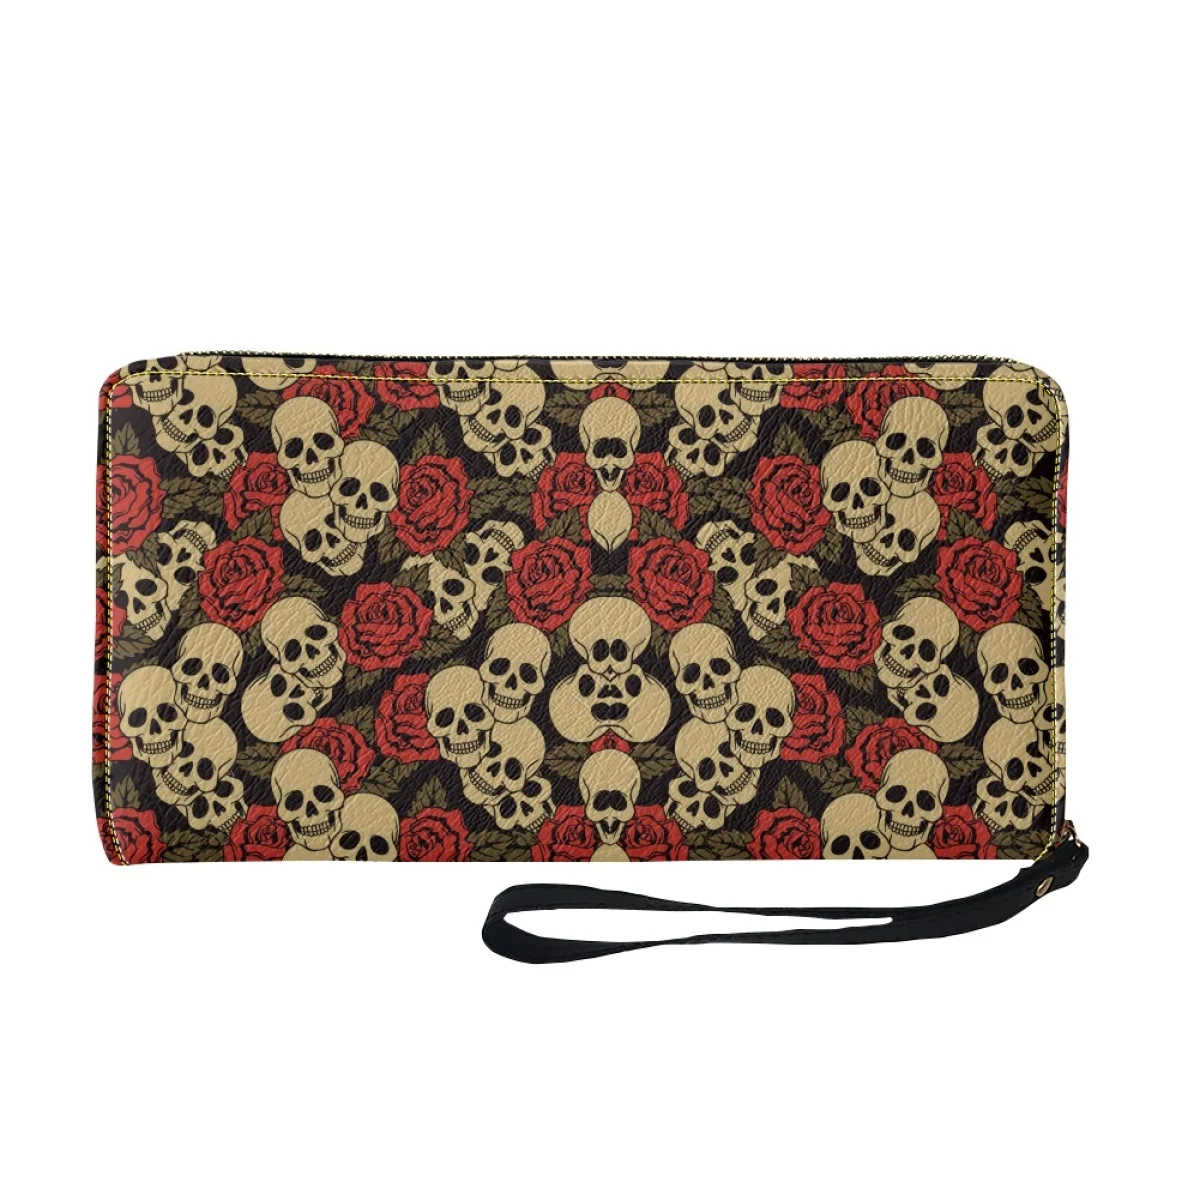 Skull Print Women Luxury Wallets For Famous Brands Clutch Wallet Pu Leather StrapSlim Phone Bag Carteras Para Mujer